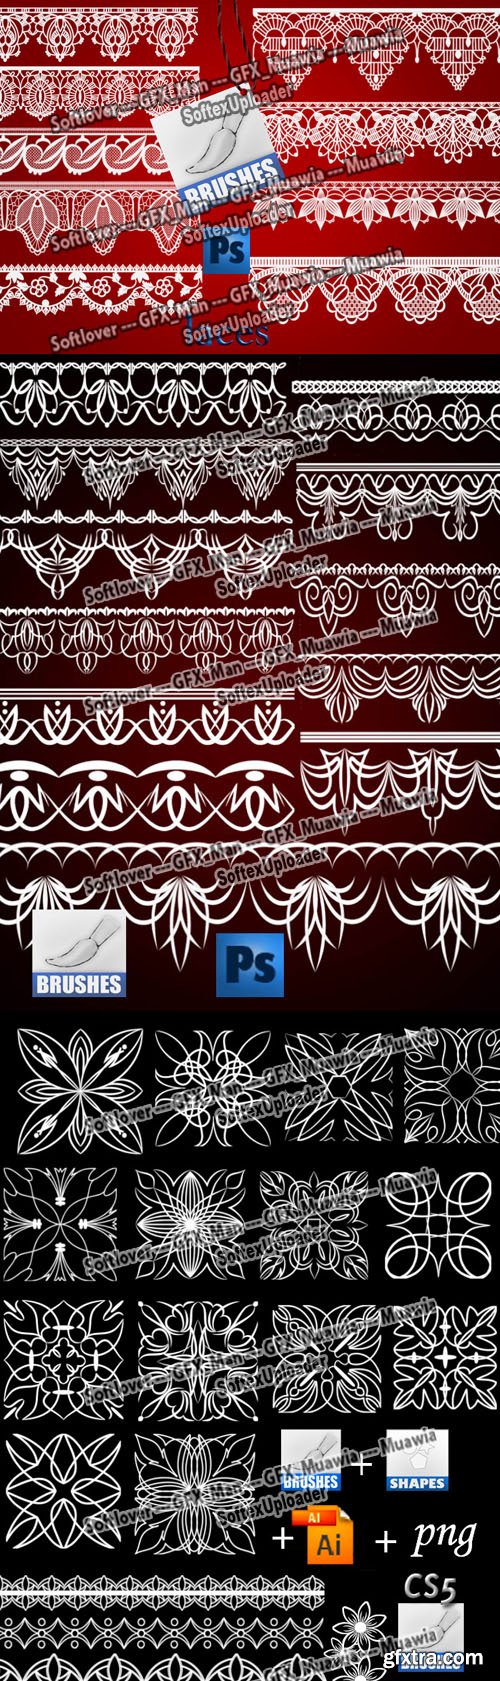 Borders & Laces Brushes Collection for Photoshop & Illustrator